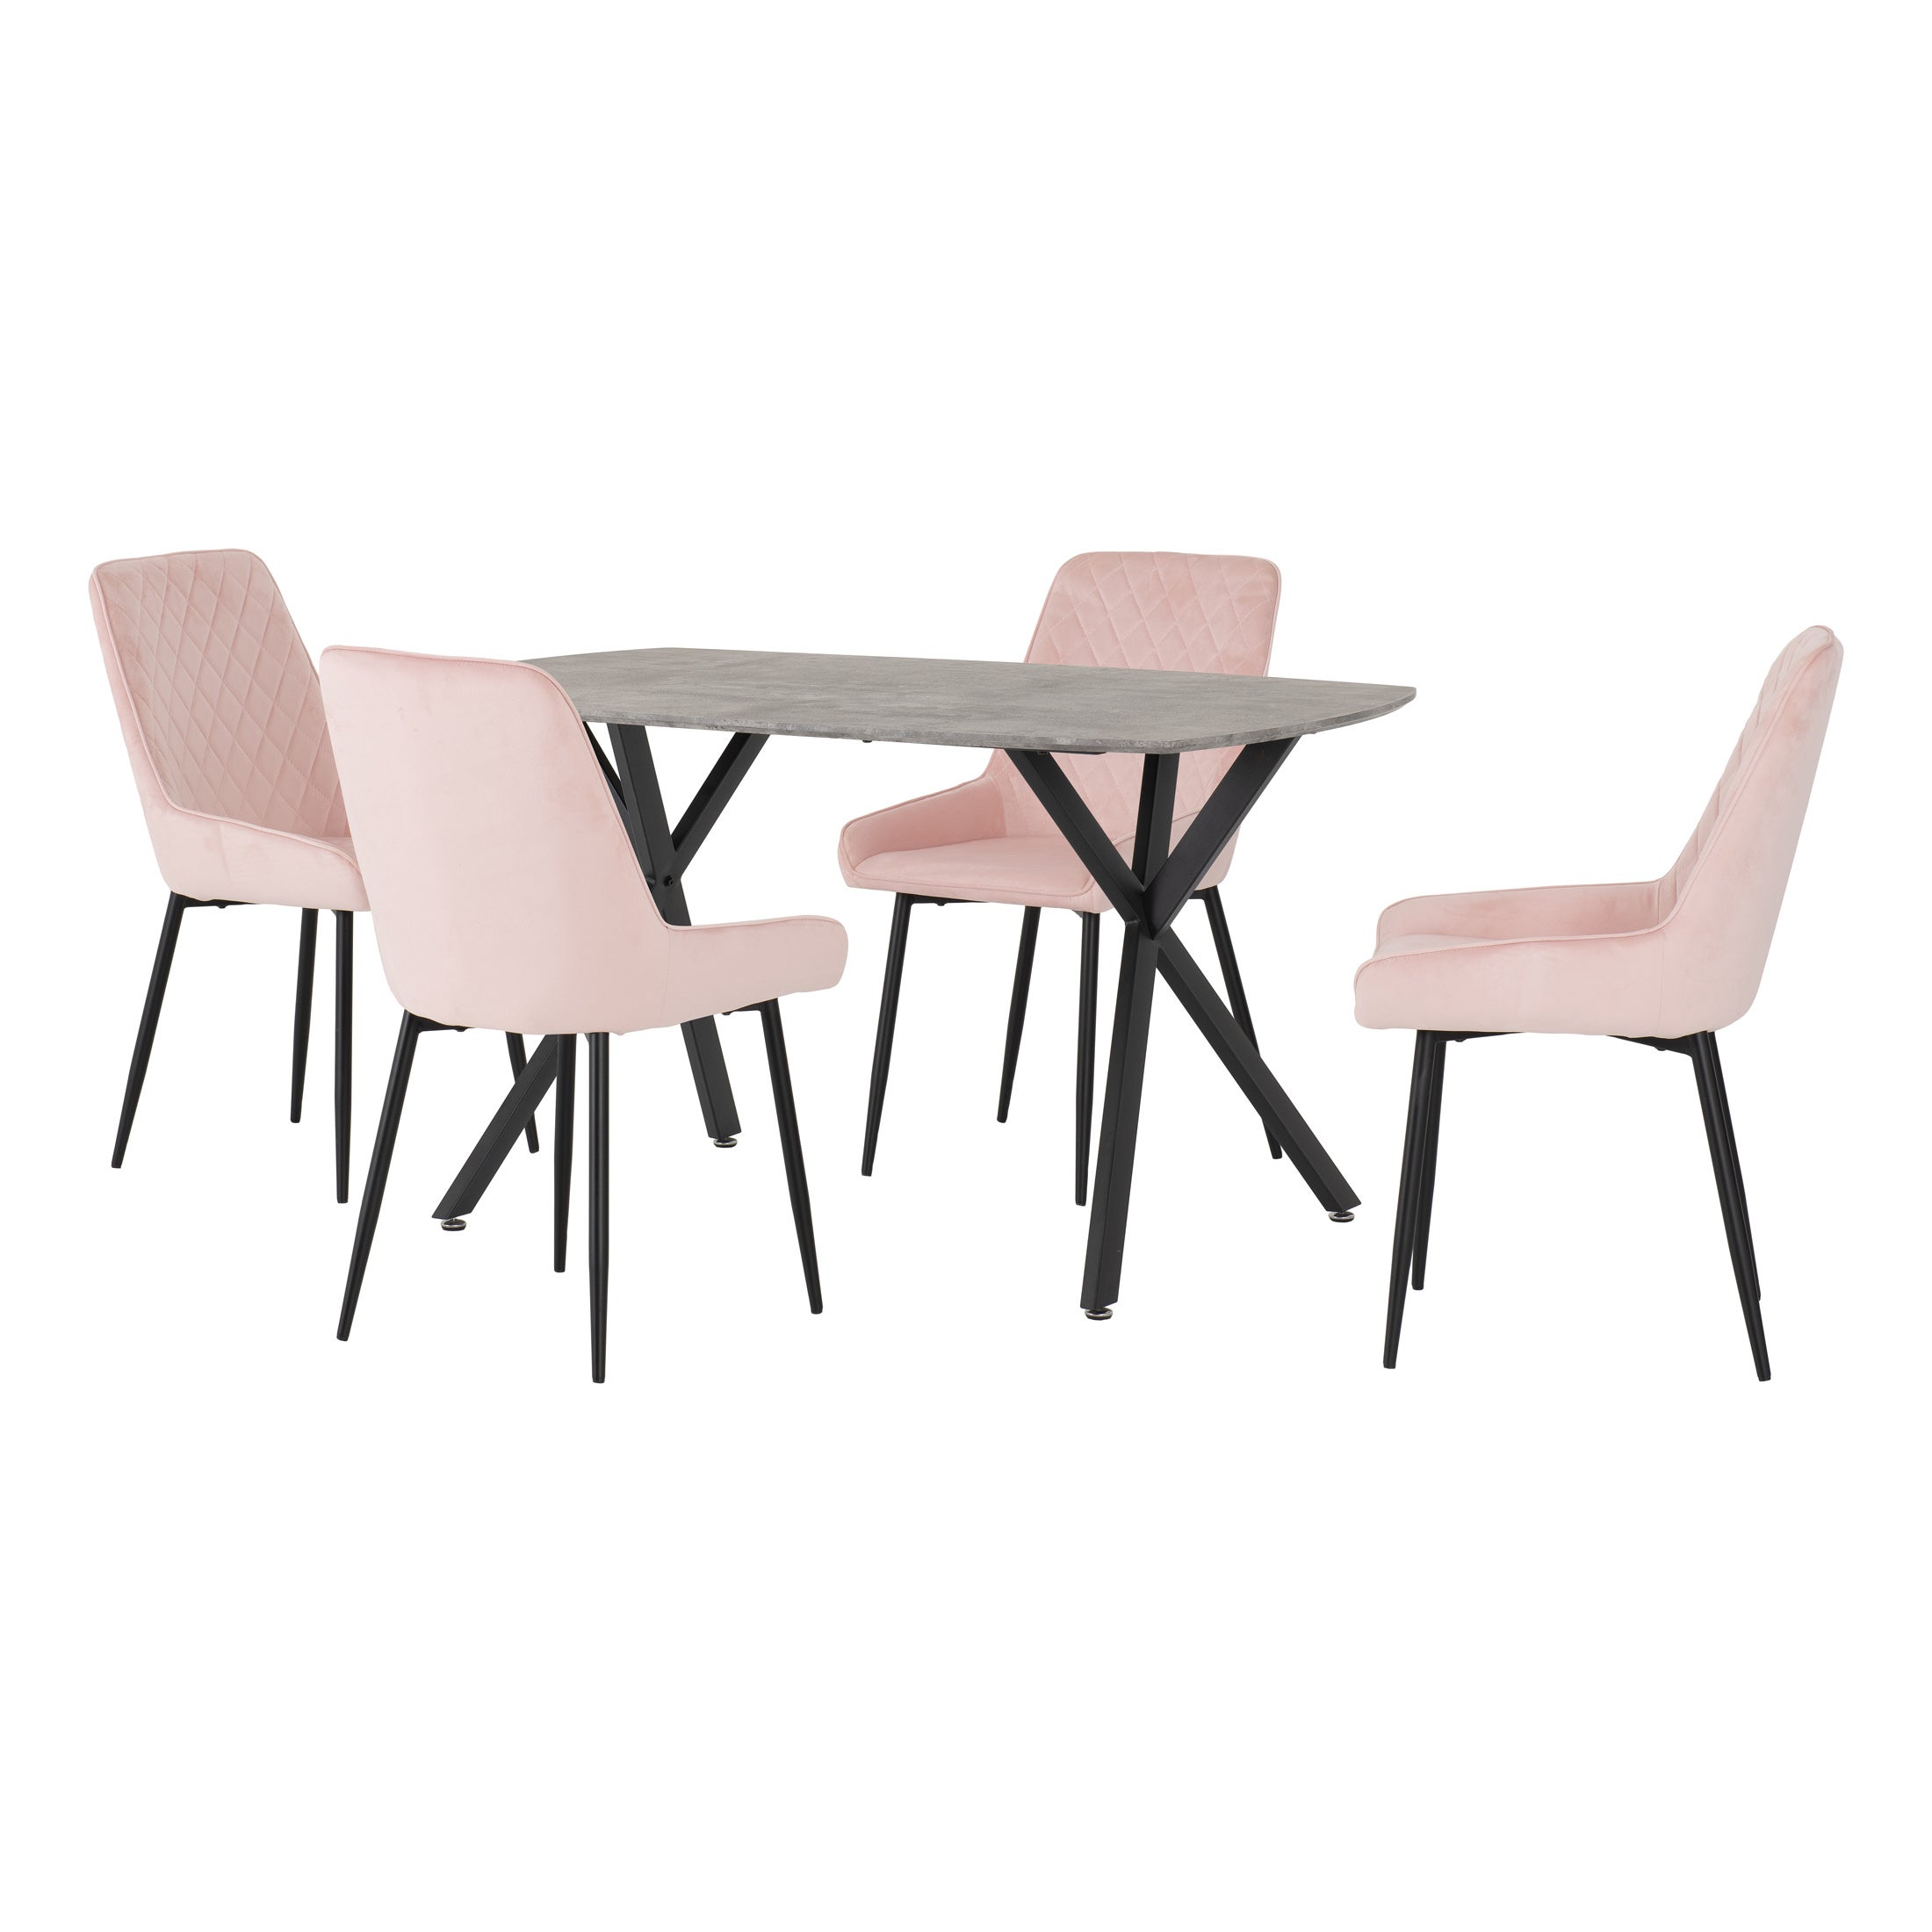 Athens Rectangular Dining Table with 4 Avery Chairs, Concrete Effect Pink